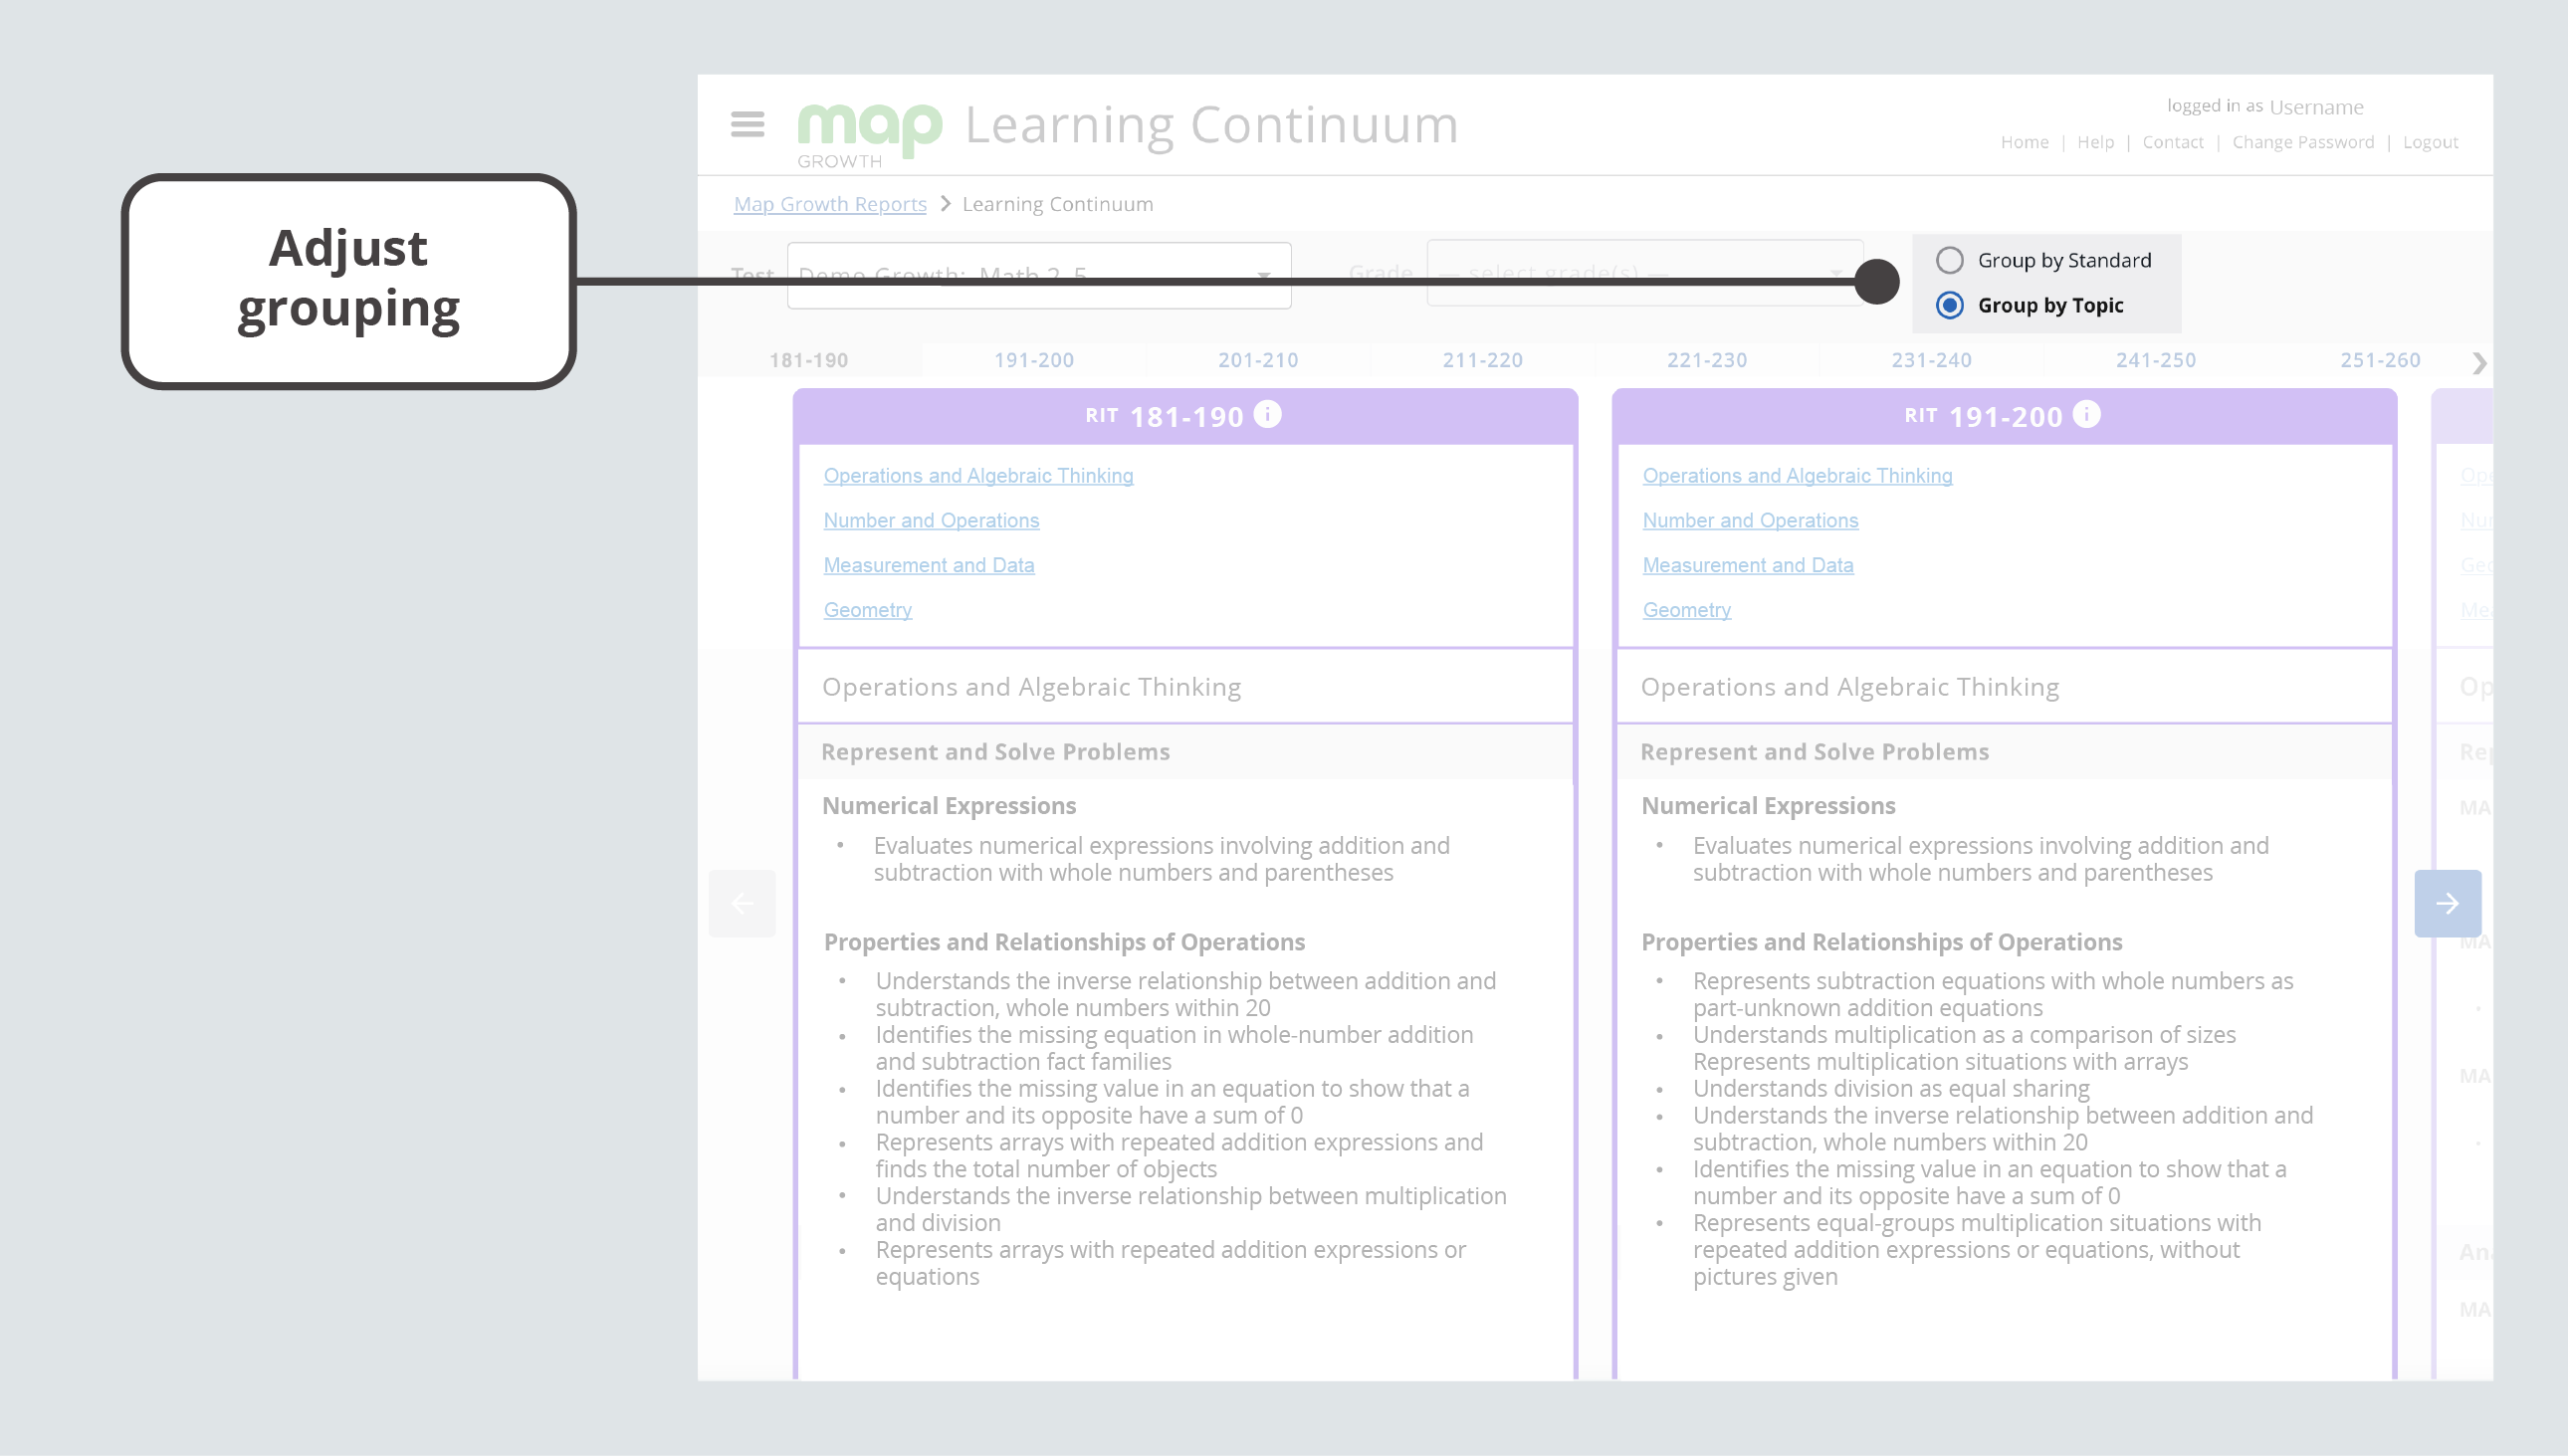 Adjust the grouping of learning statements to Group by Standard or Group by Topic.